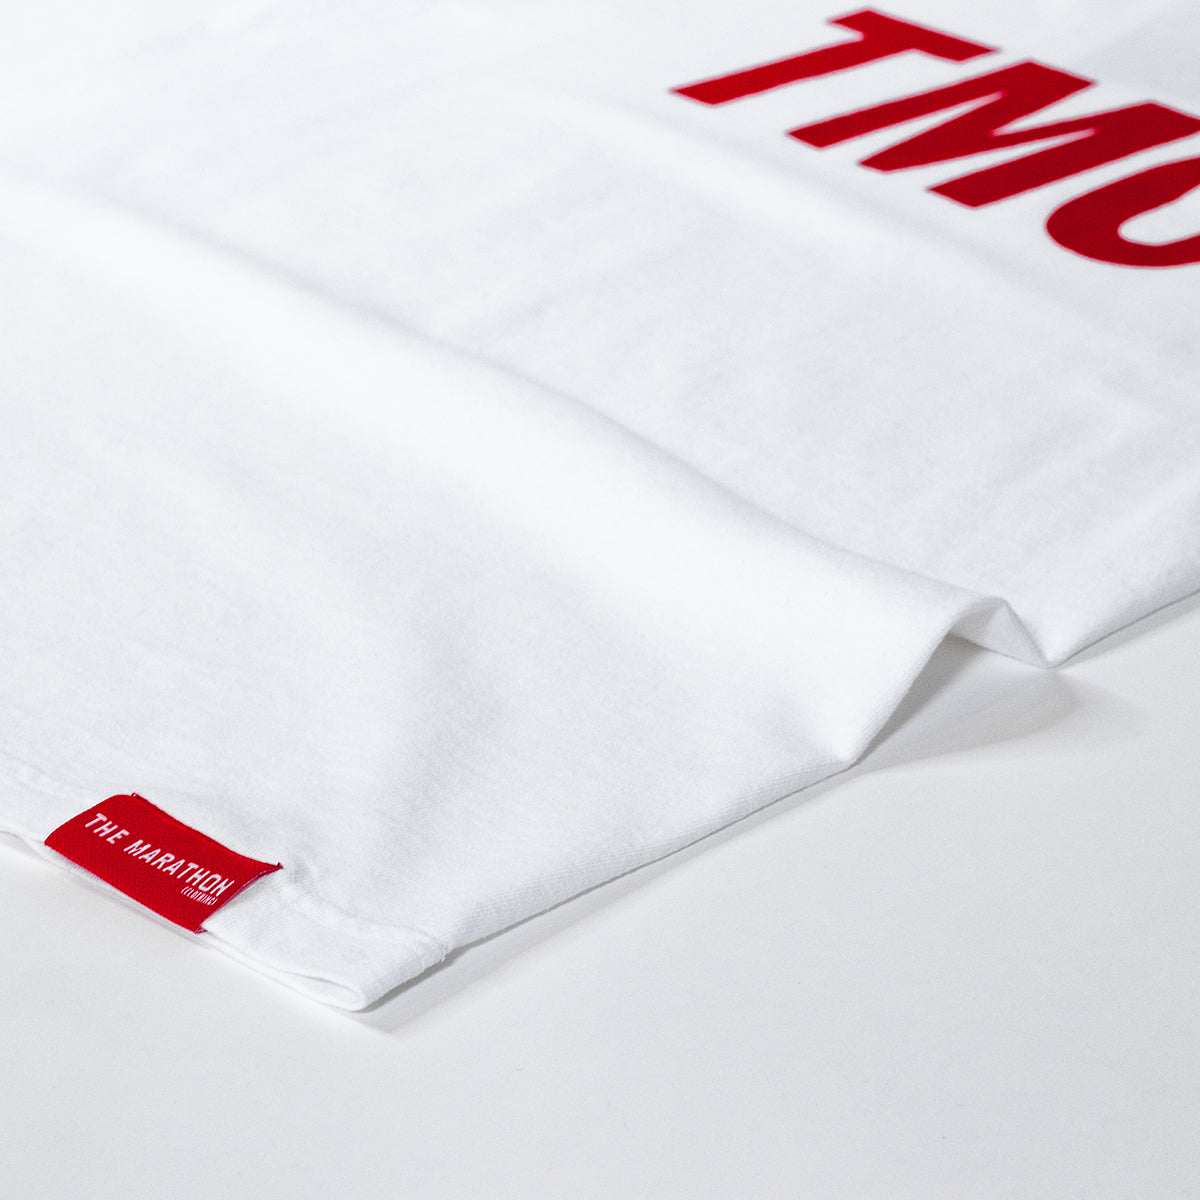 TMC T-shirt - White/Red - Woven Label